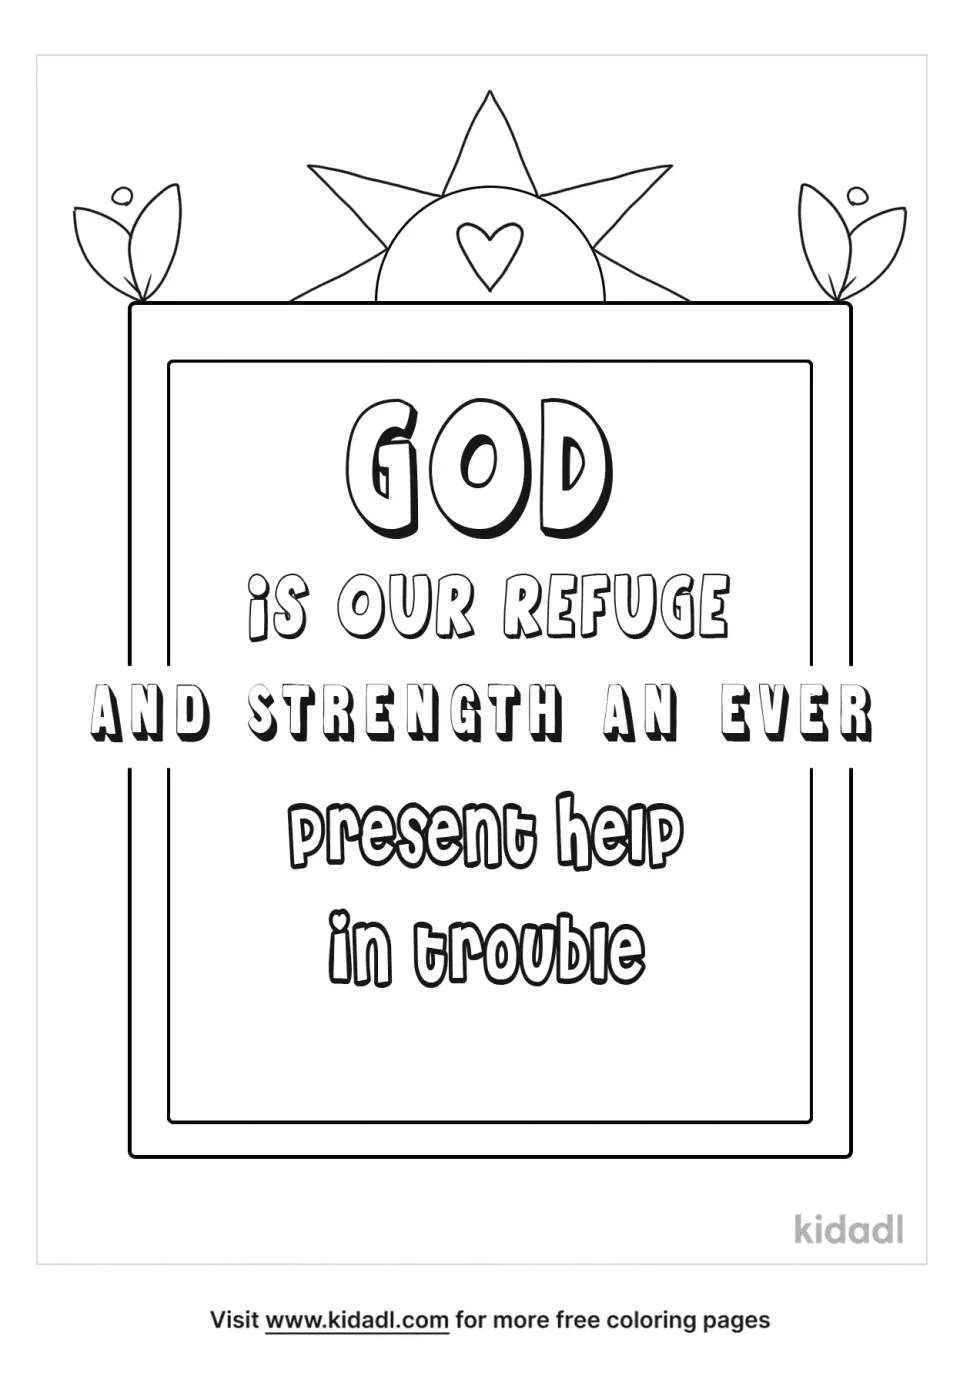 God Is Our Refuge And Strength An Ever Present Help In Trouble. Coloring Page